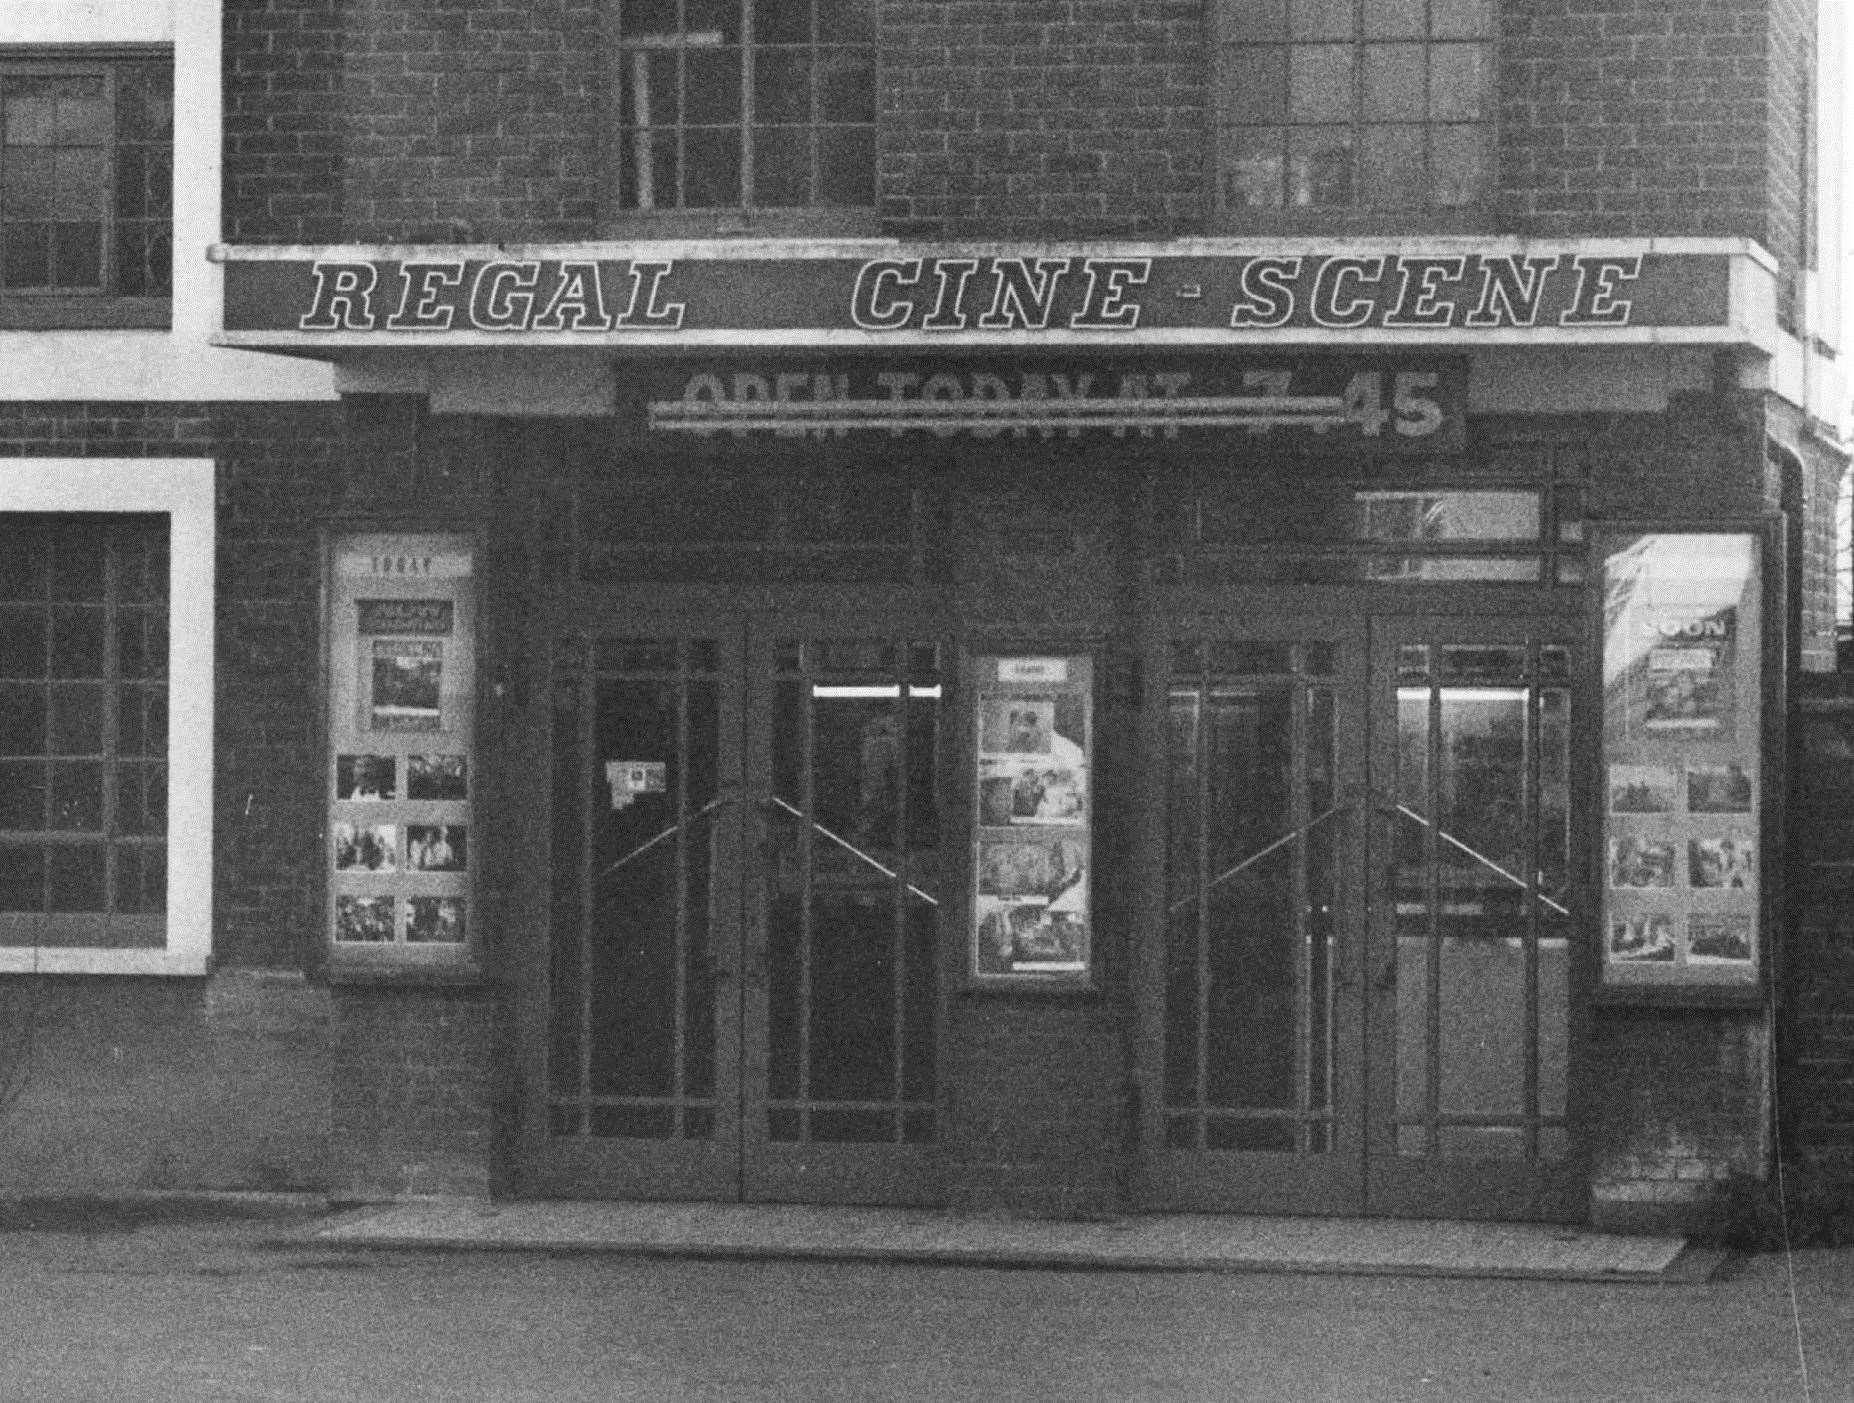 The Regal cinema in Cranbrook in 1983...despite this picture making it look like it was taken in the 1950s